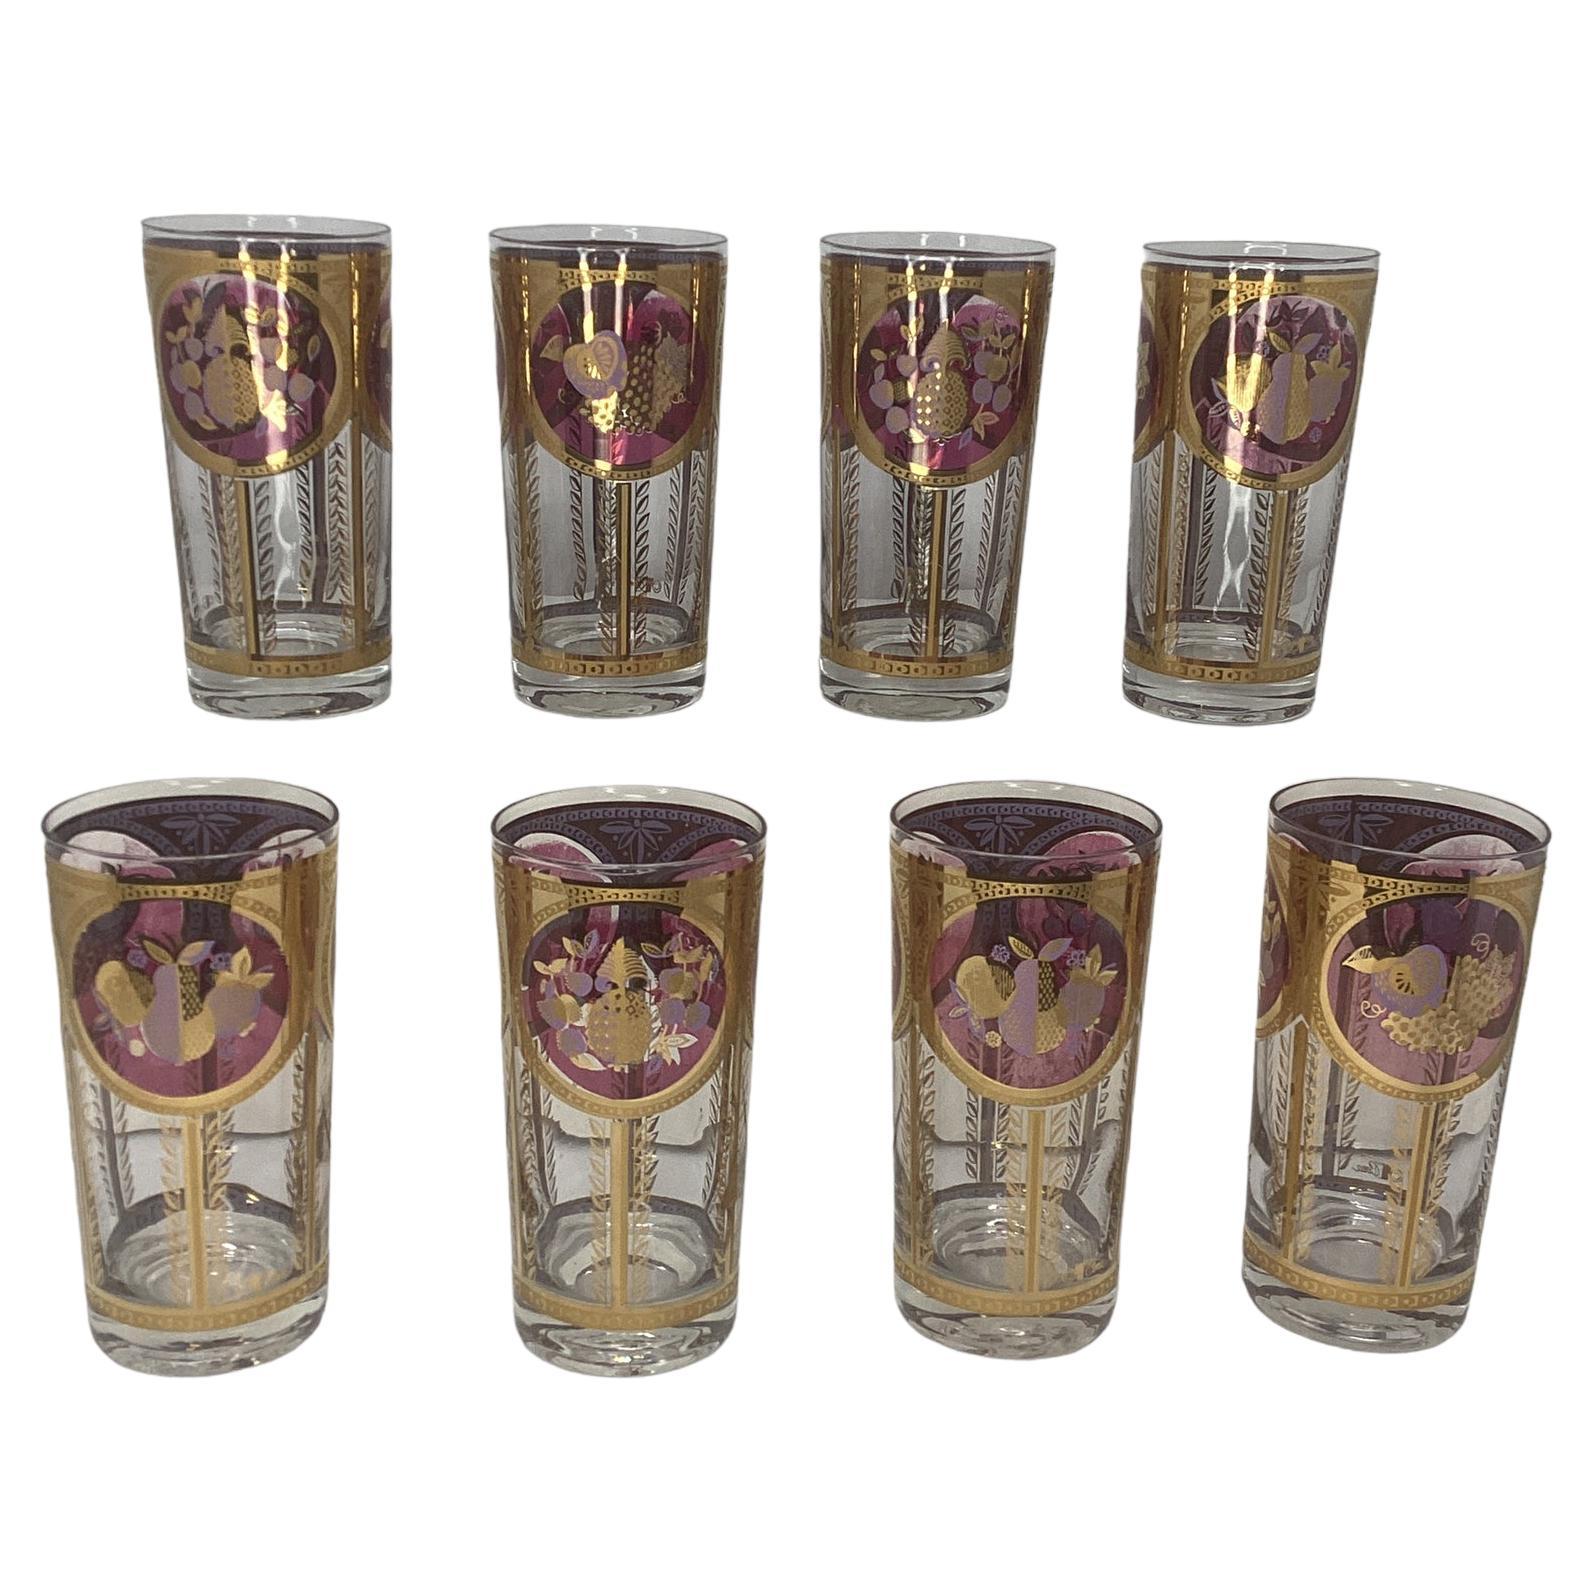 Set of 8 Cera Highball Glasses. Each glass decorated with various fruits including apples, pineapple, grapes and strawberries. Fruits are framed in a circular panel trimmed in 22K gold decoration.
All are in excellent vintage condition.